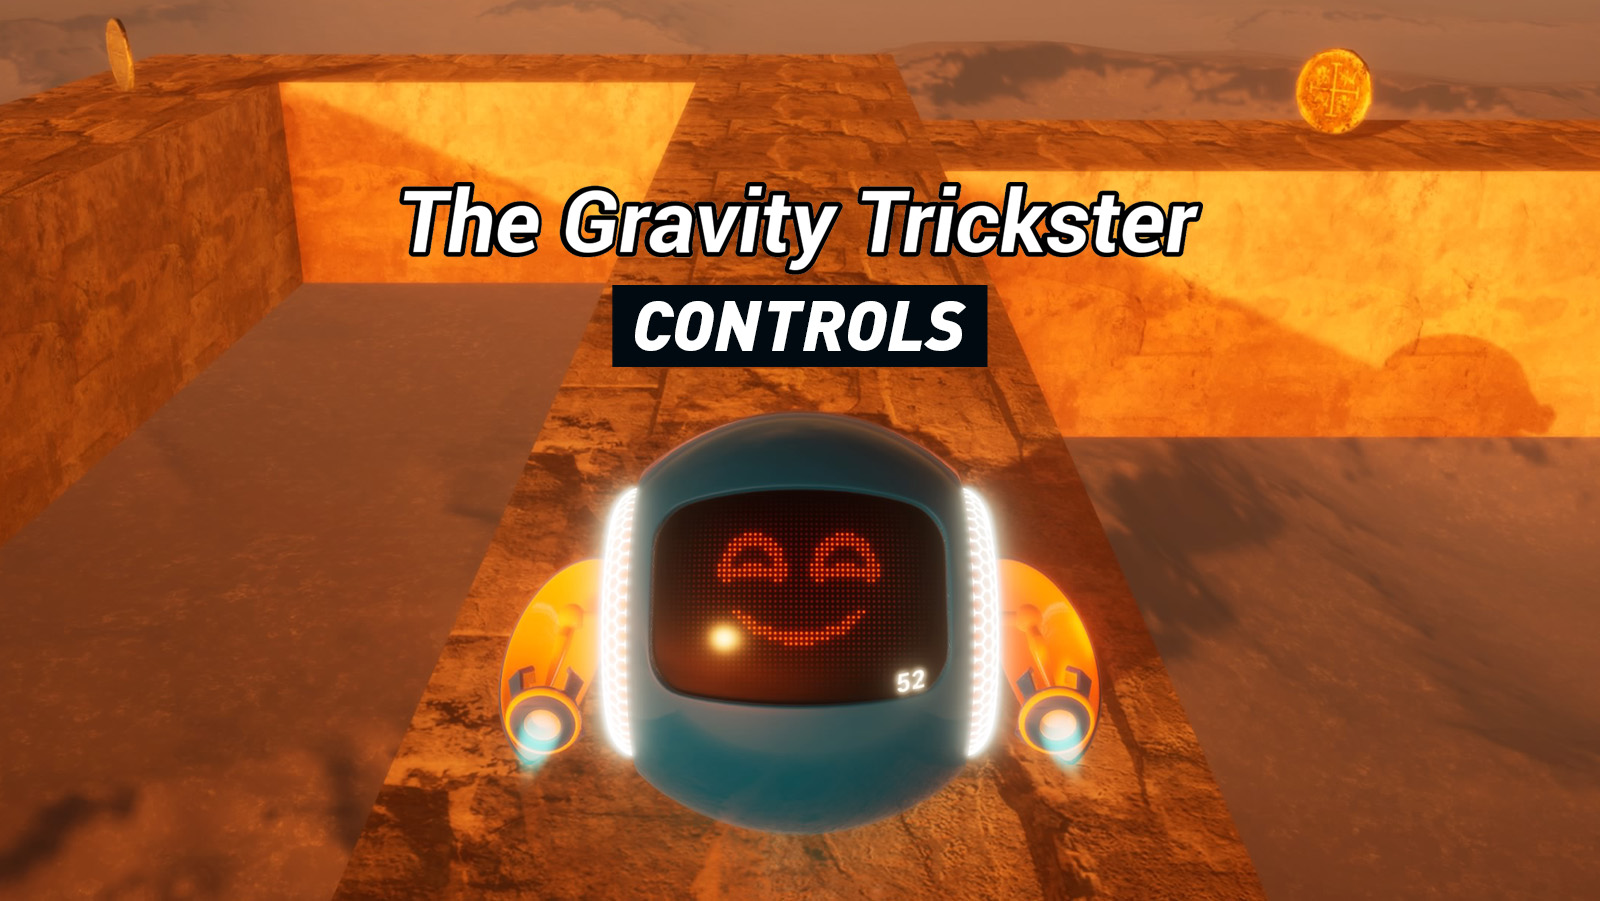 The Gravity Trickster Controls